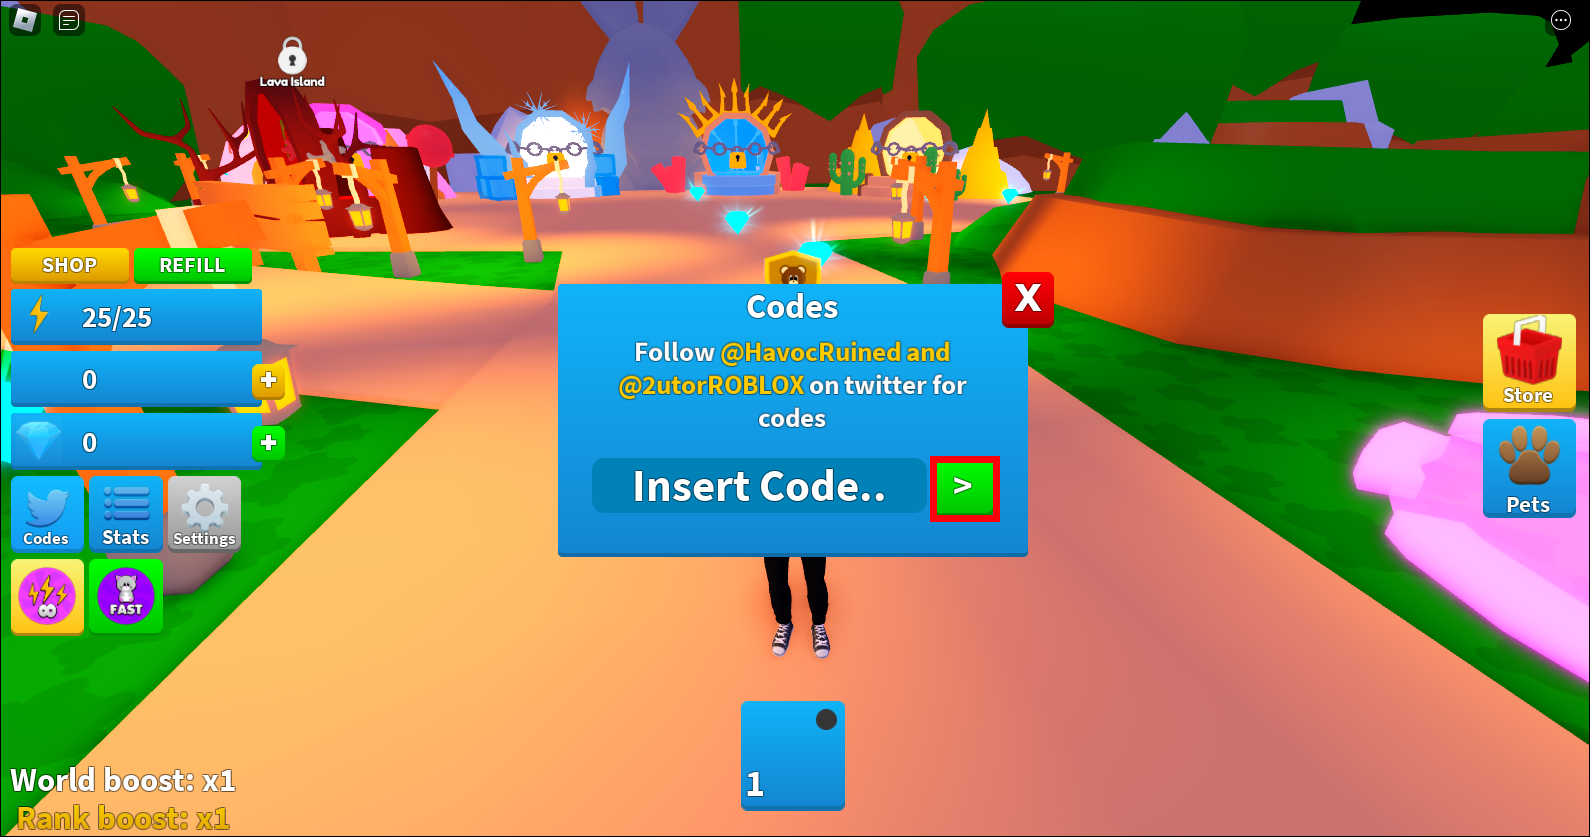 ALL 2021 *4 CODES!* Roblox Promo Codes For FREE Hats and FREE